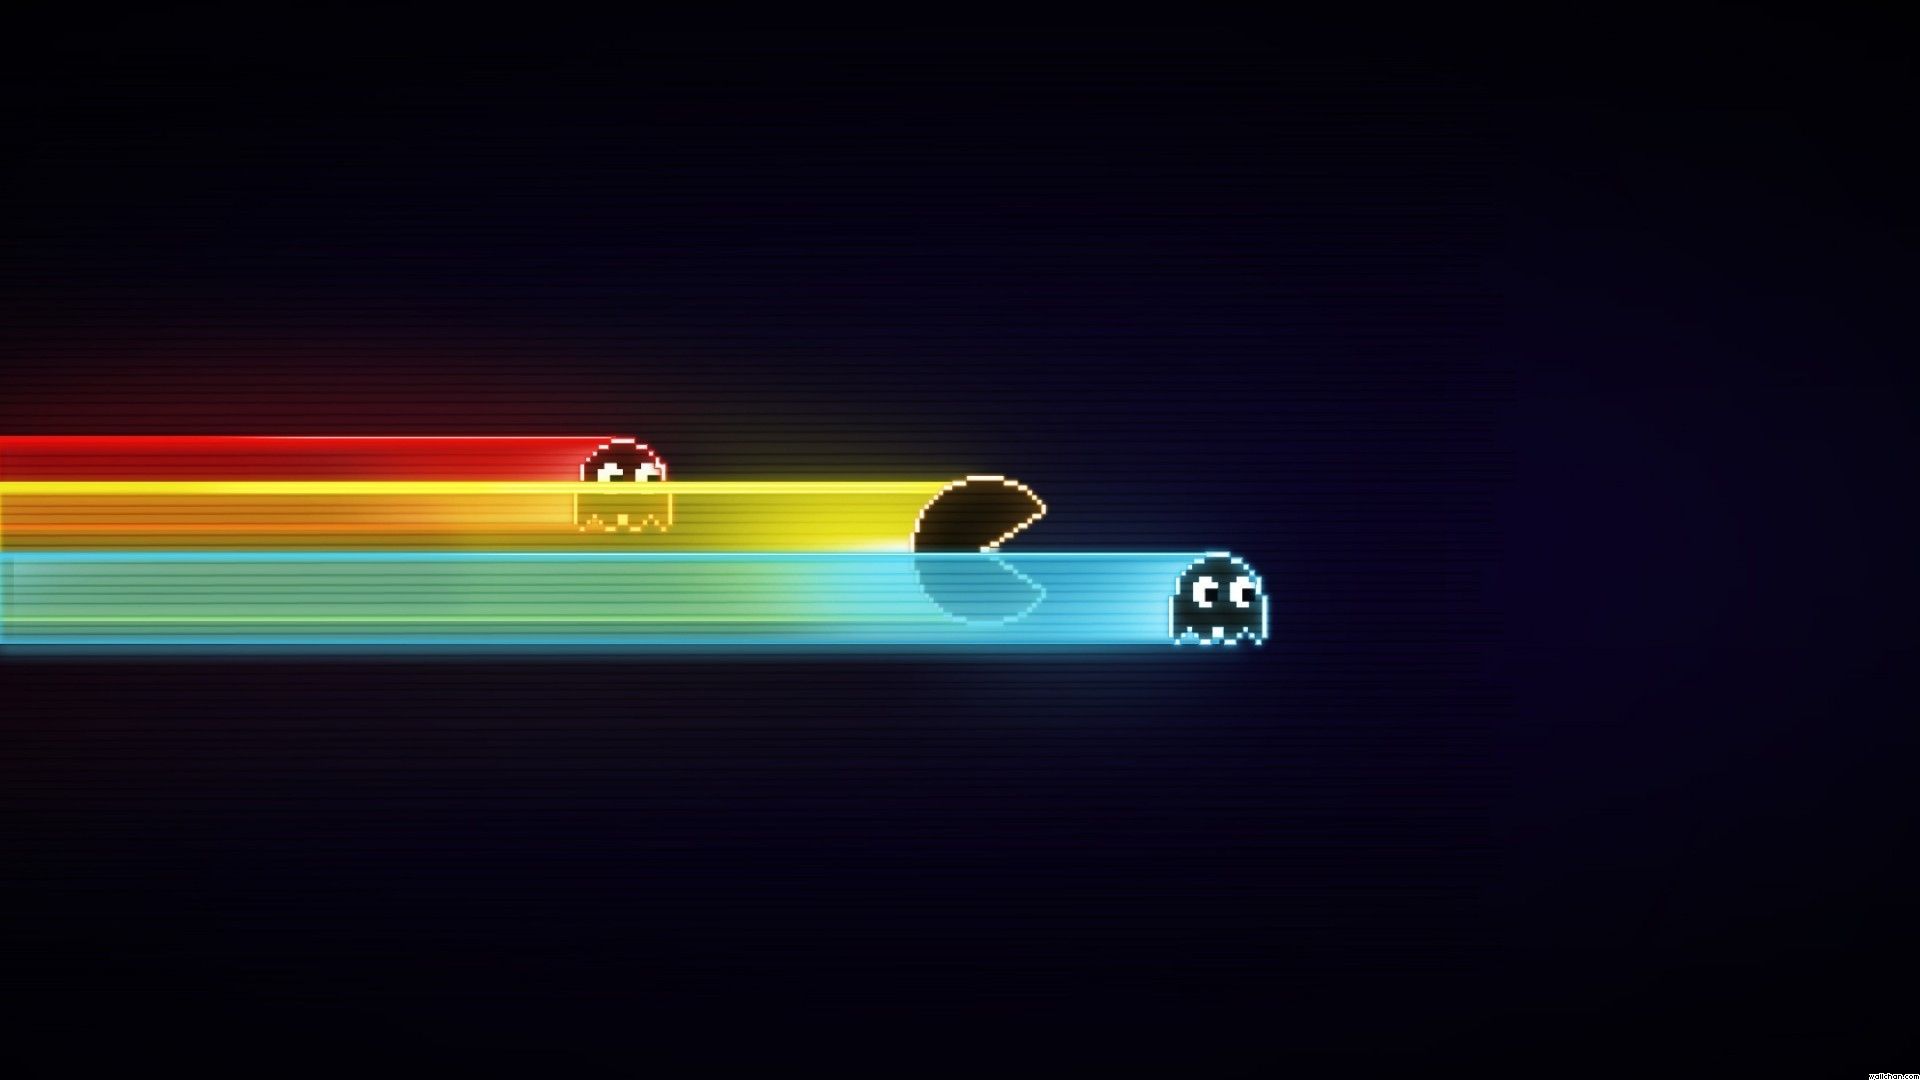 Pac Man Wallpapers Pictures Images HD Wallpapers Download Free Map Images Wallpaper [wallpaper684.blogspot.com]